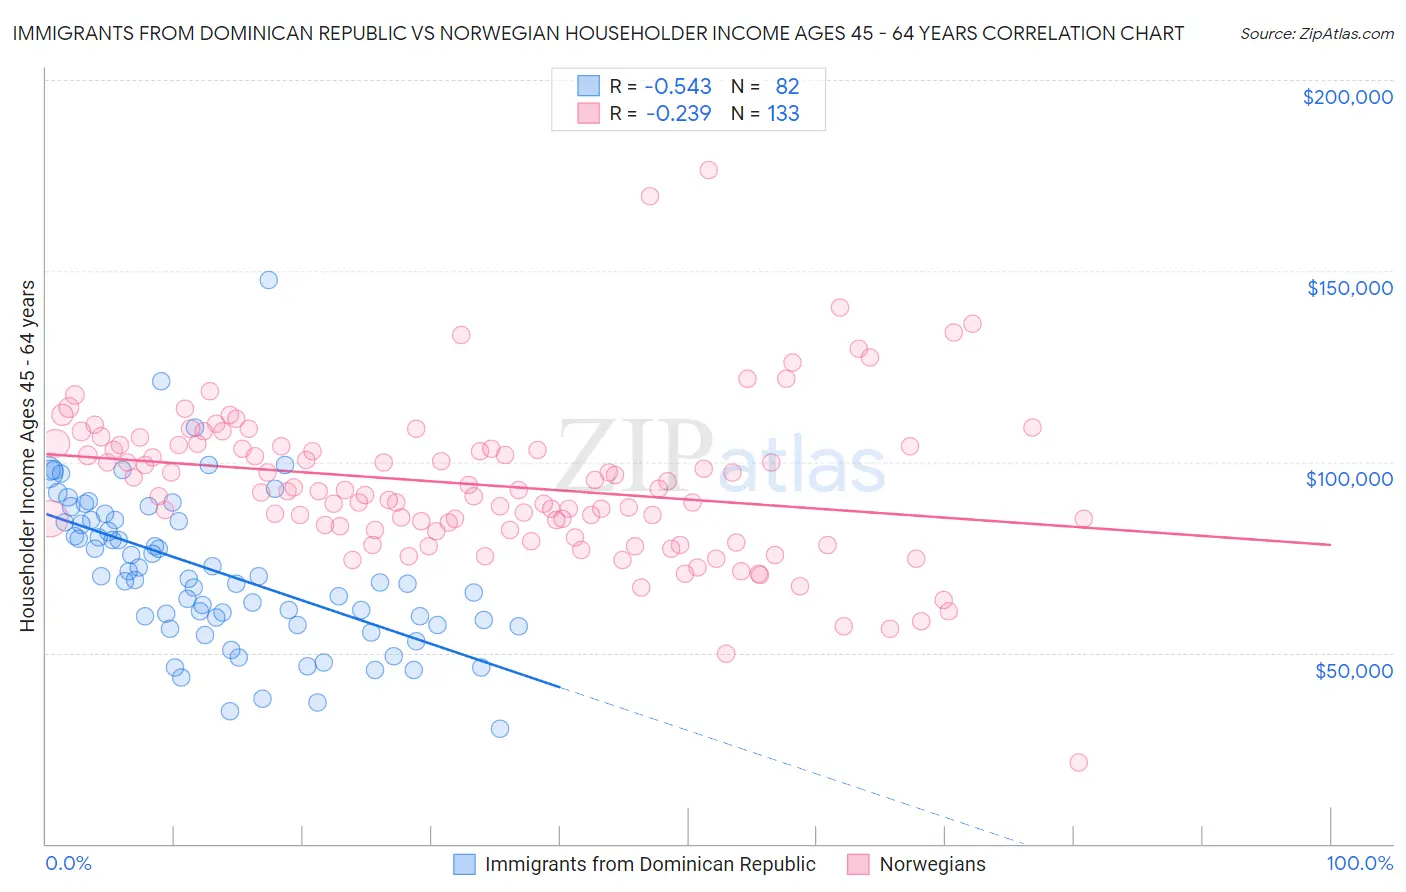 Immigrants from Dominican Republic vs Norwegian Householder Income Ages 45 - 64 years